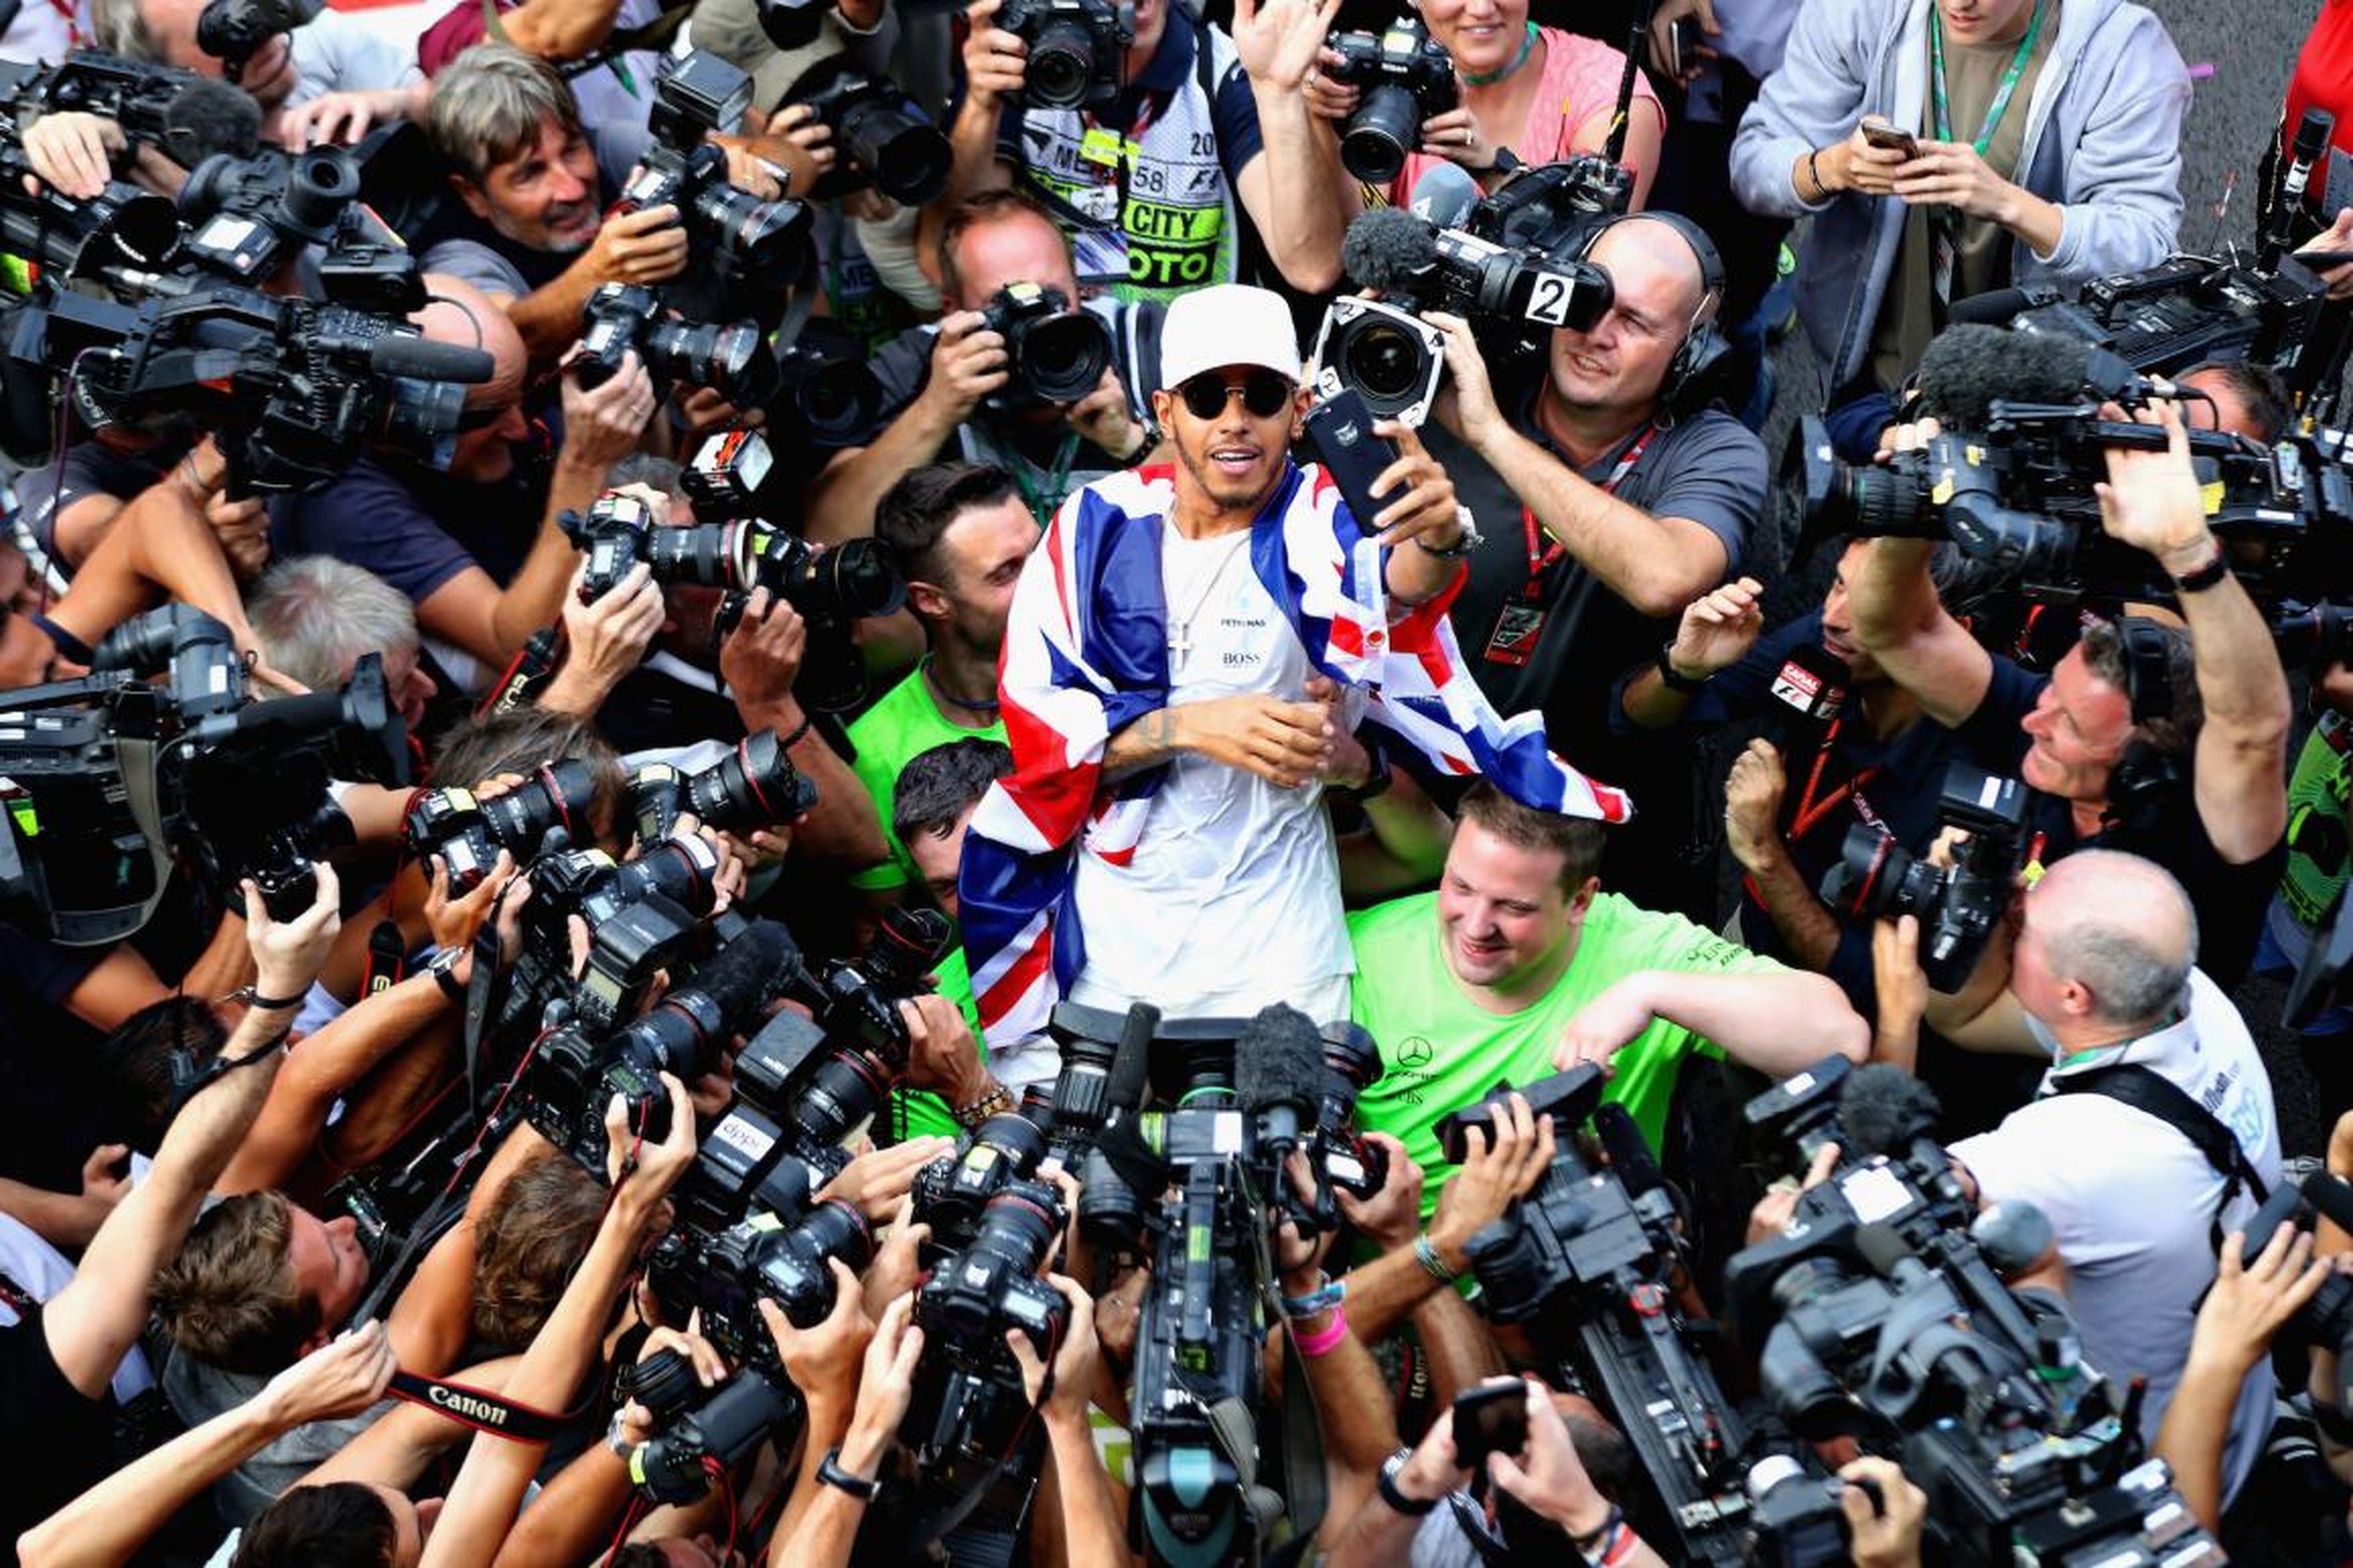 This is British racer Lewis Hamilton, who was recently crowned Formula 1 world champion for the fifth time.